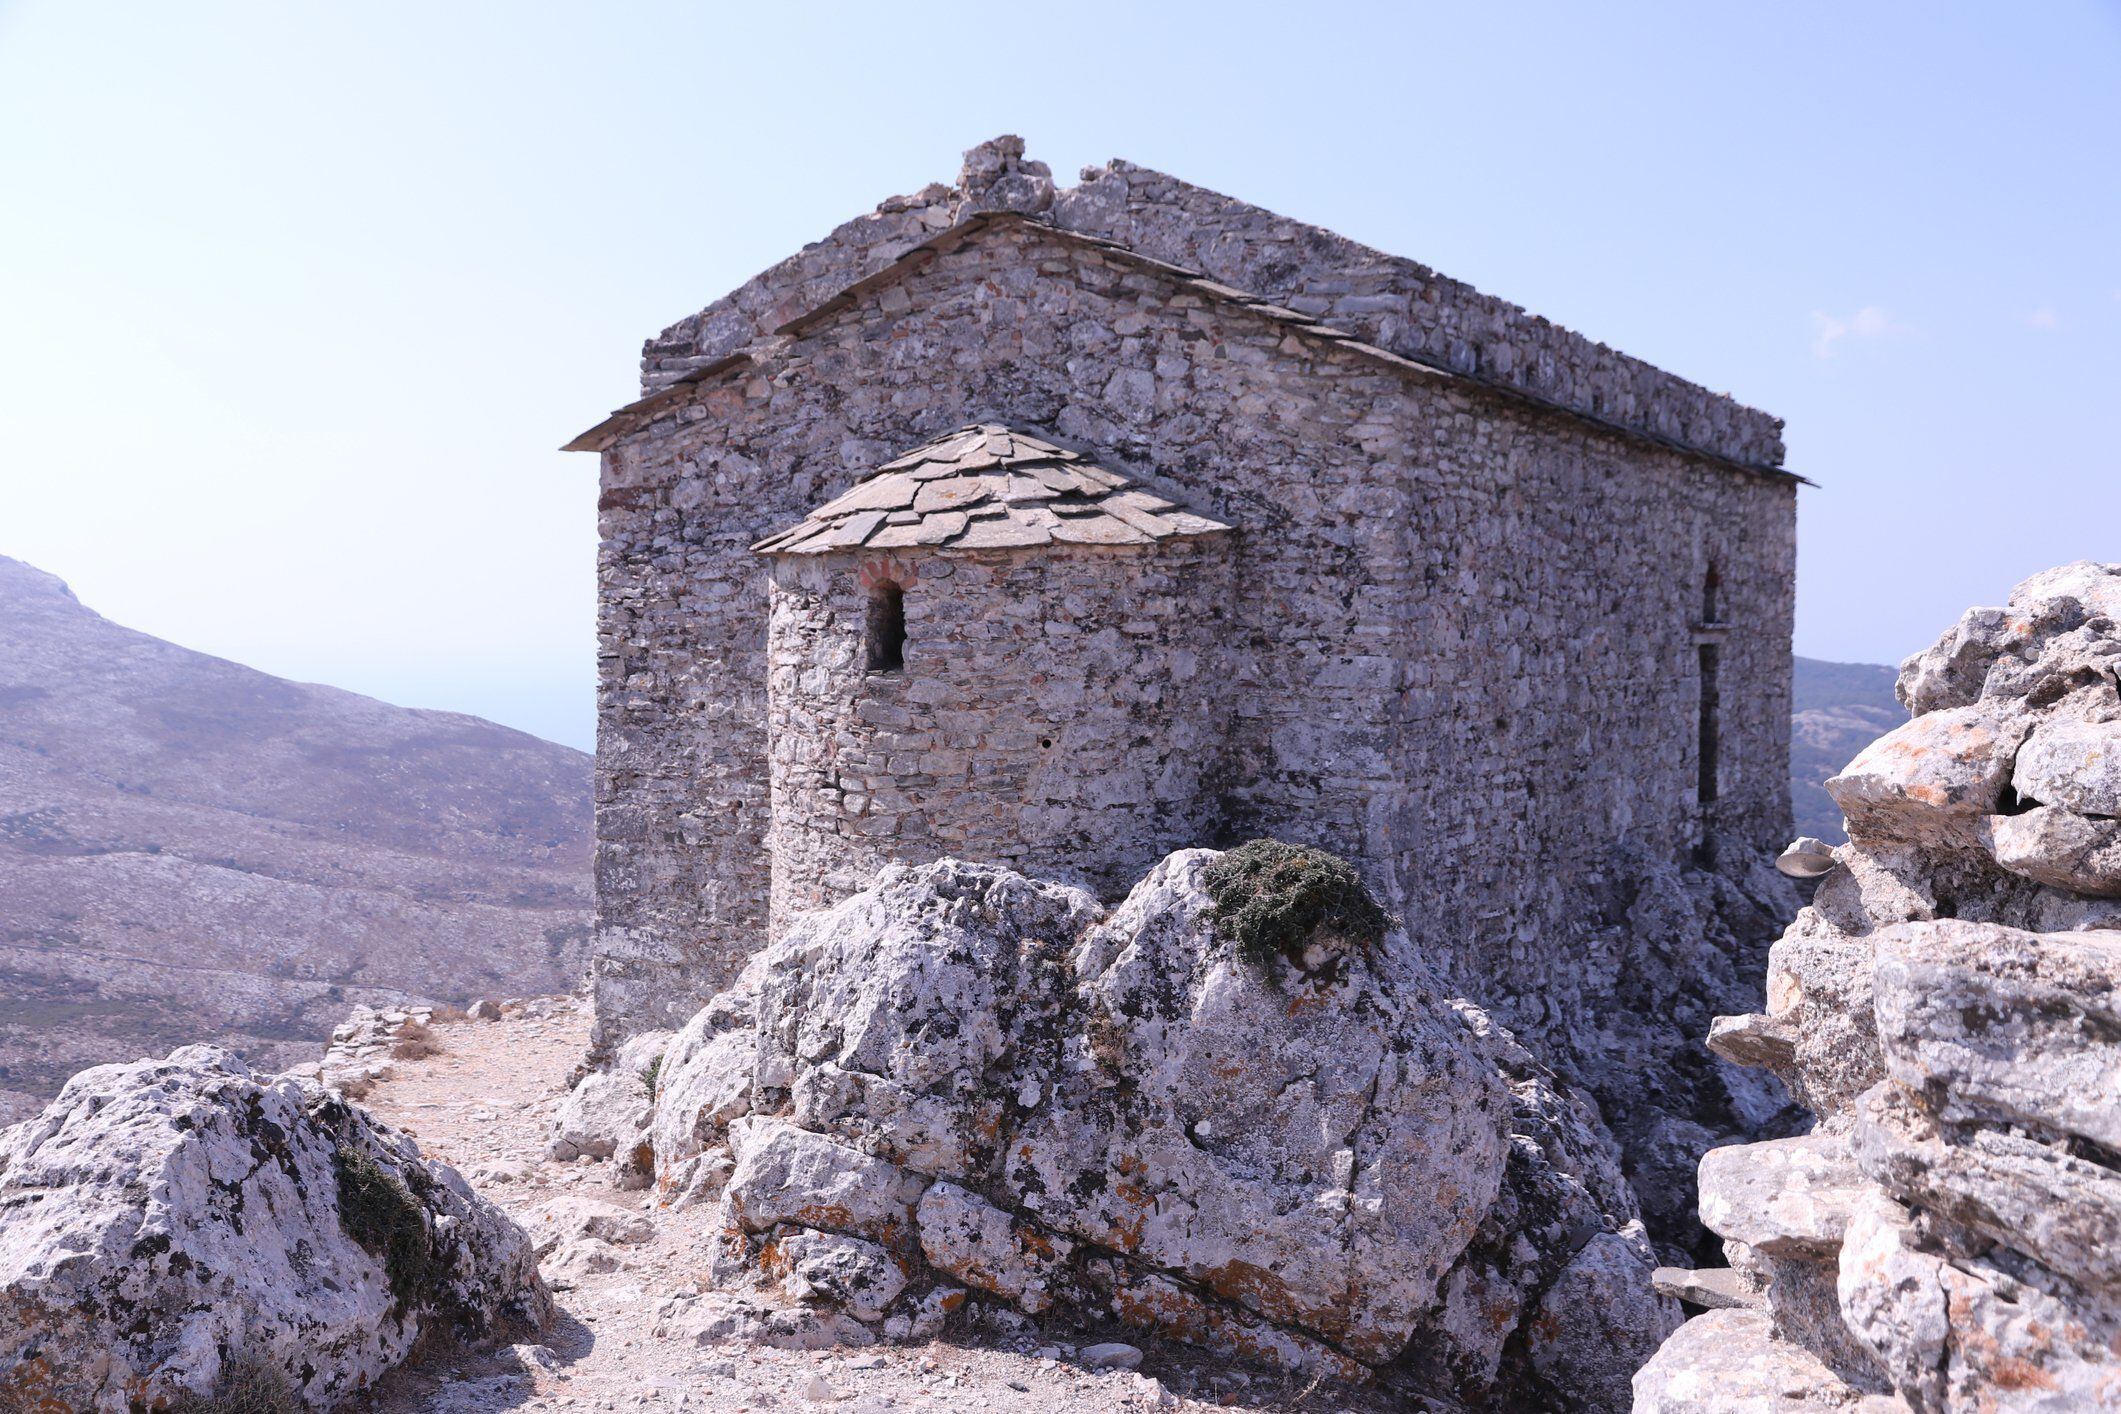 The Byzantine Koskina Castle was built in the 10th century, as a fortress on a remote mountain in the center of Icaria against attacks by pirates and enemies.